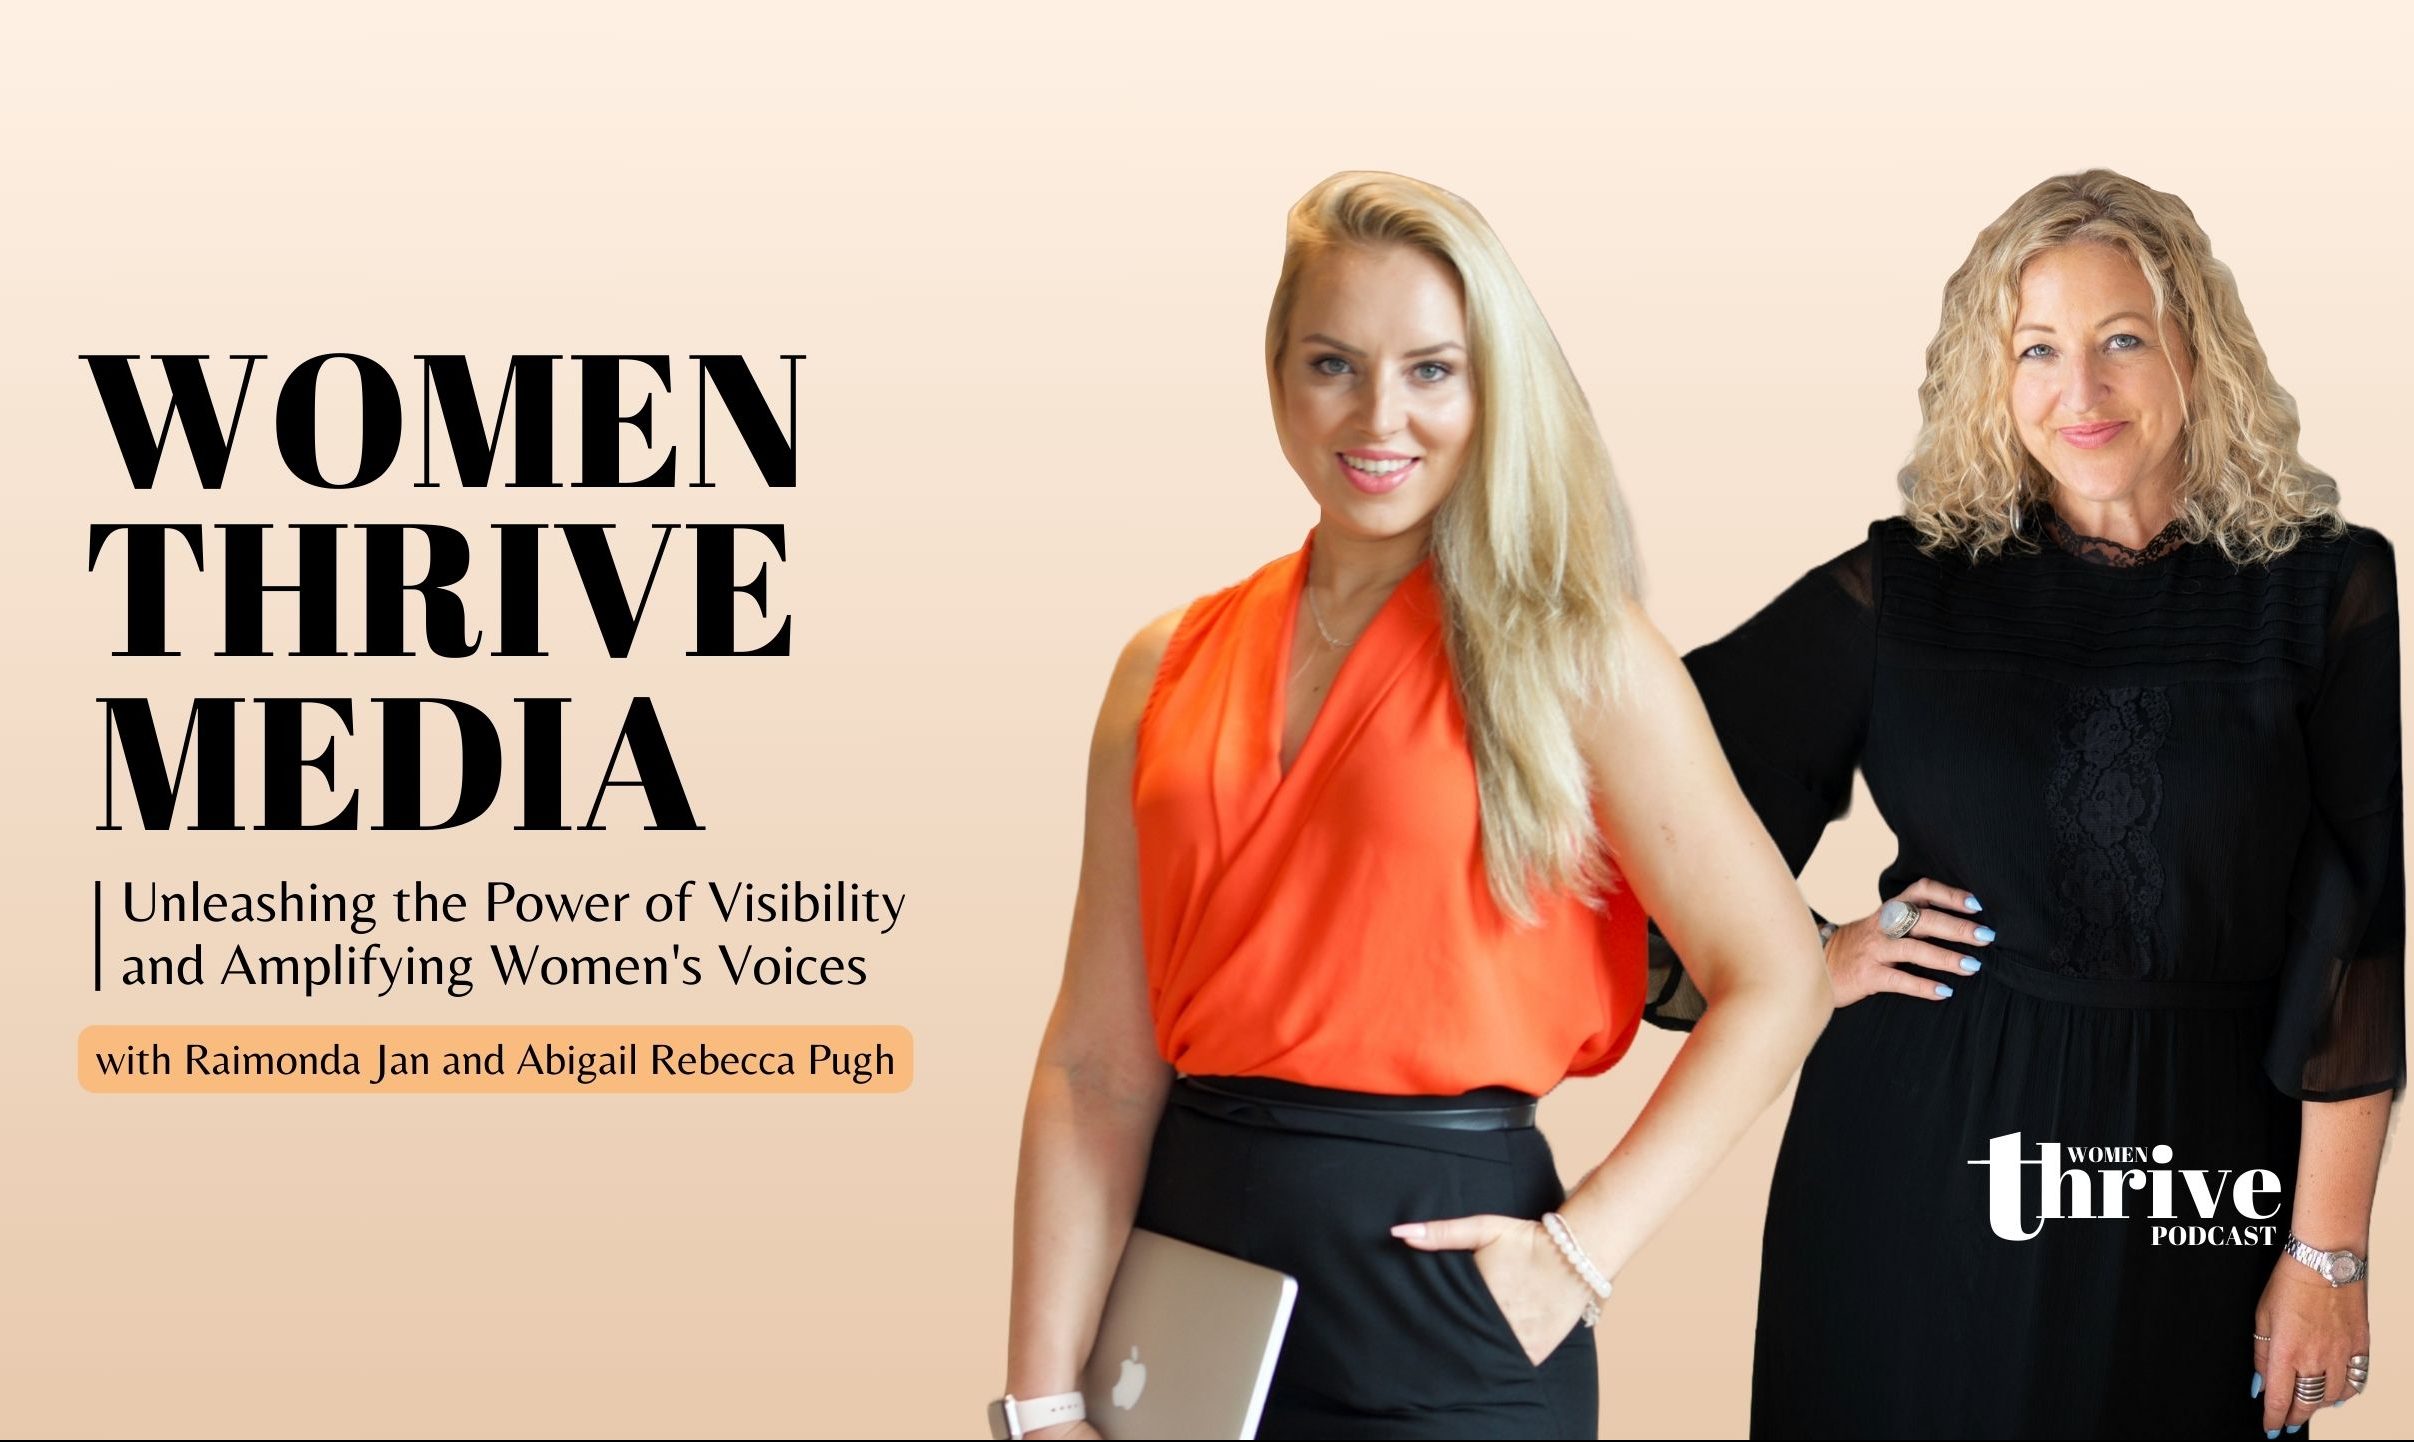 Women Thrive Media: Unleashing the Power of Visibility and Amplifying Women's Voices